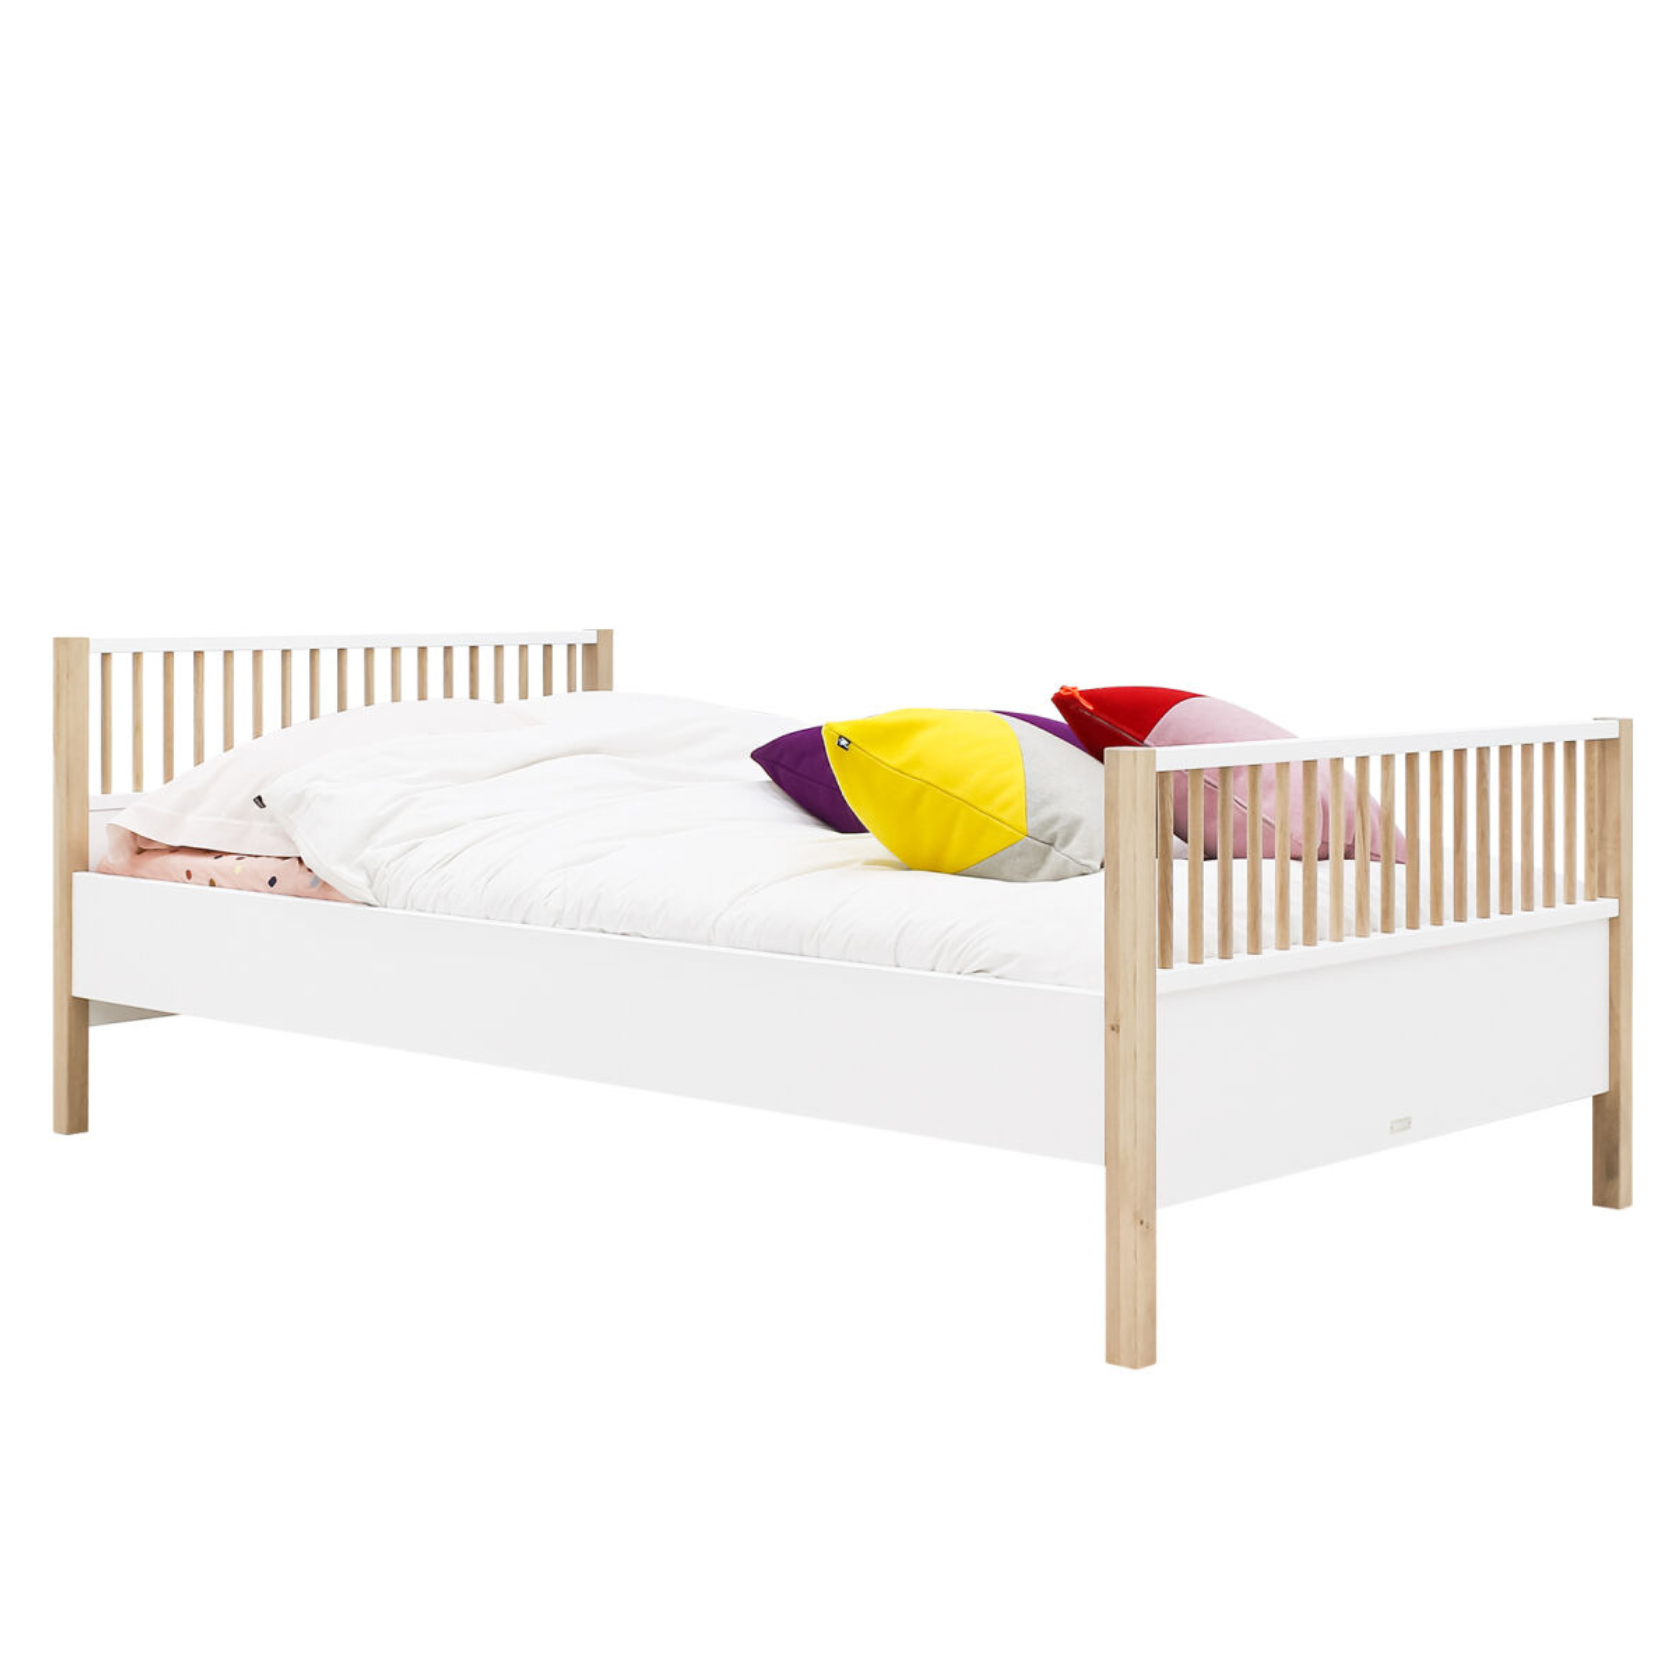 Deer Industries Kids Furniture SIngapore, Bopita Singapore, Kids Furniture made in Europe, Shop Twin Beds Singapore, Double Bed Singapore